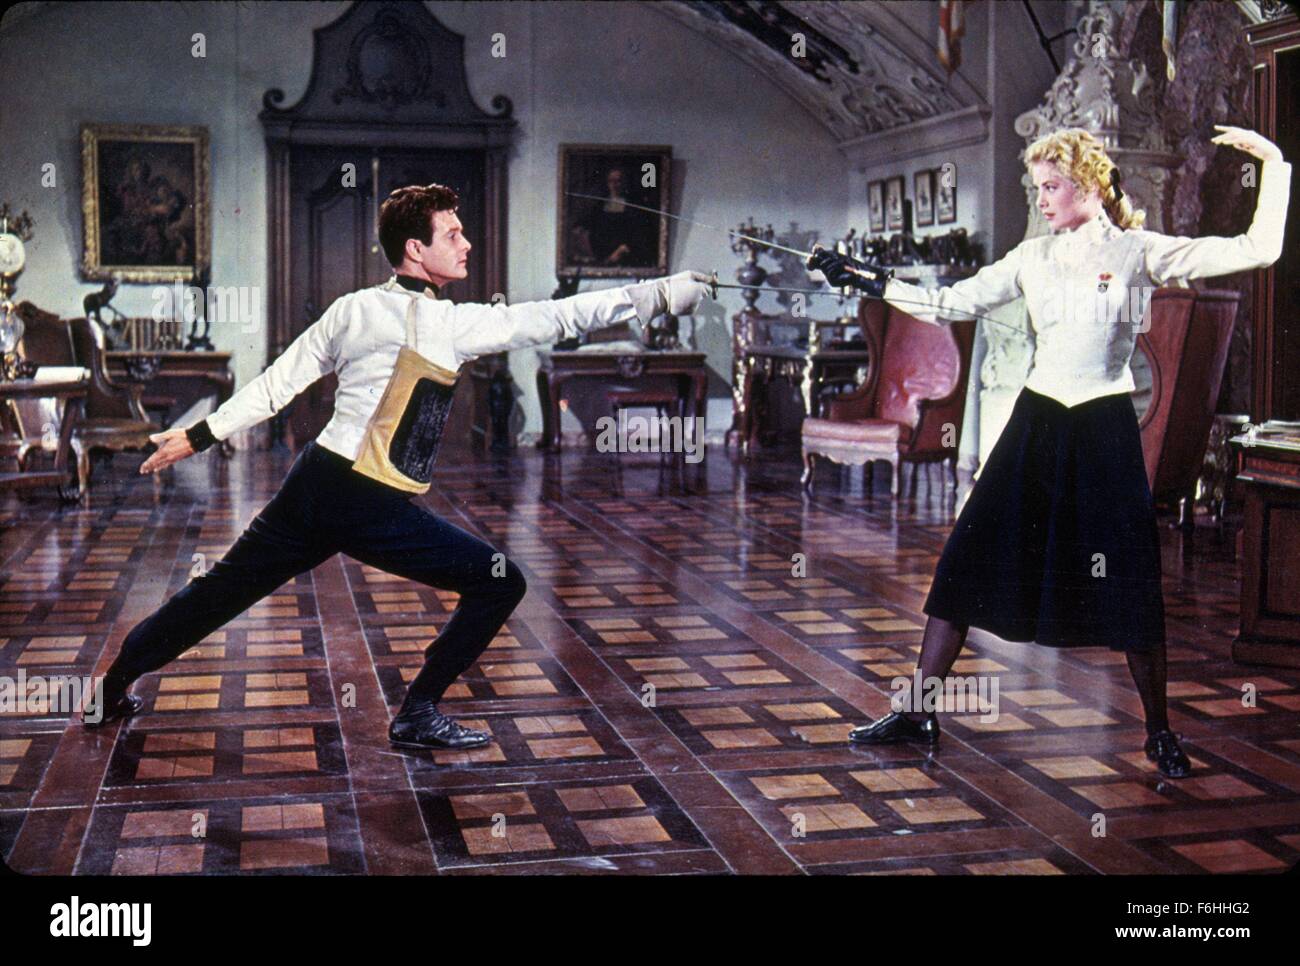 1956, Film Title: SWAN, Director: CHARLES VIDOR, Studio: MGM, Pictured: FENCING, LOUIS JOURDAN, GRACE KELLY. (Credit Image: SNAP) Stock Photo